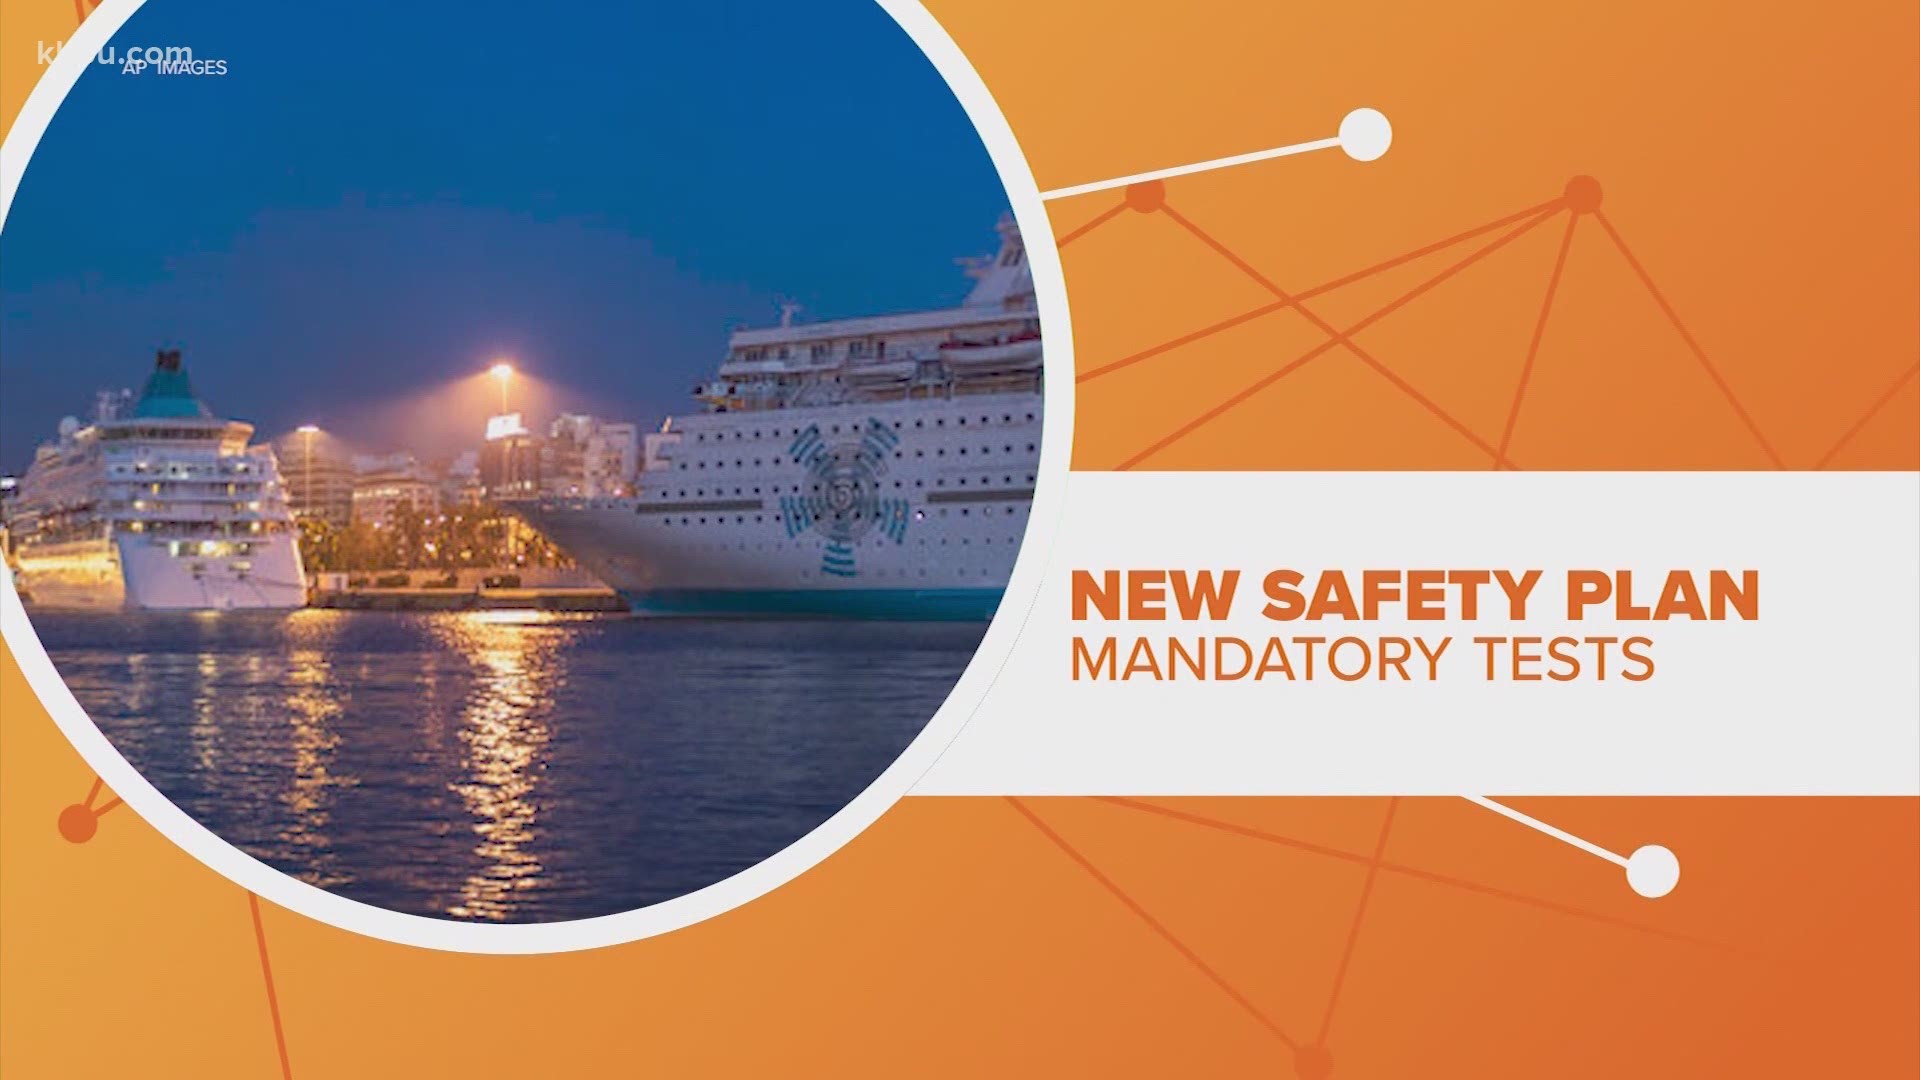 Ready to travel the high seas? Here are the new rules you'll see on cruise ships when they set sail again.